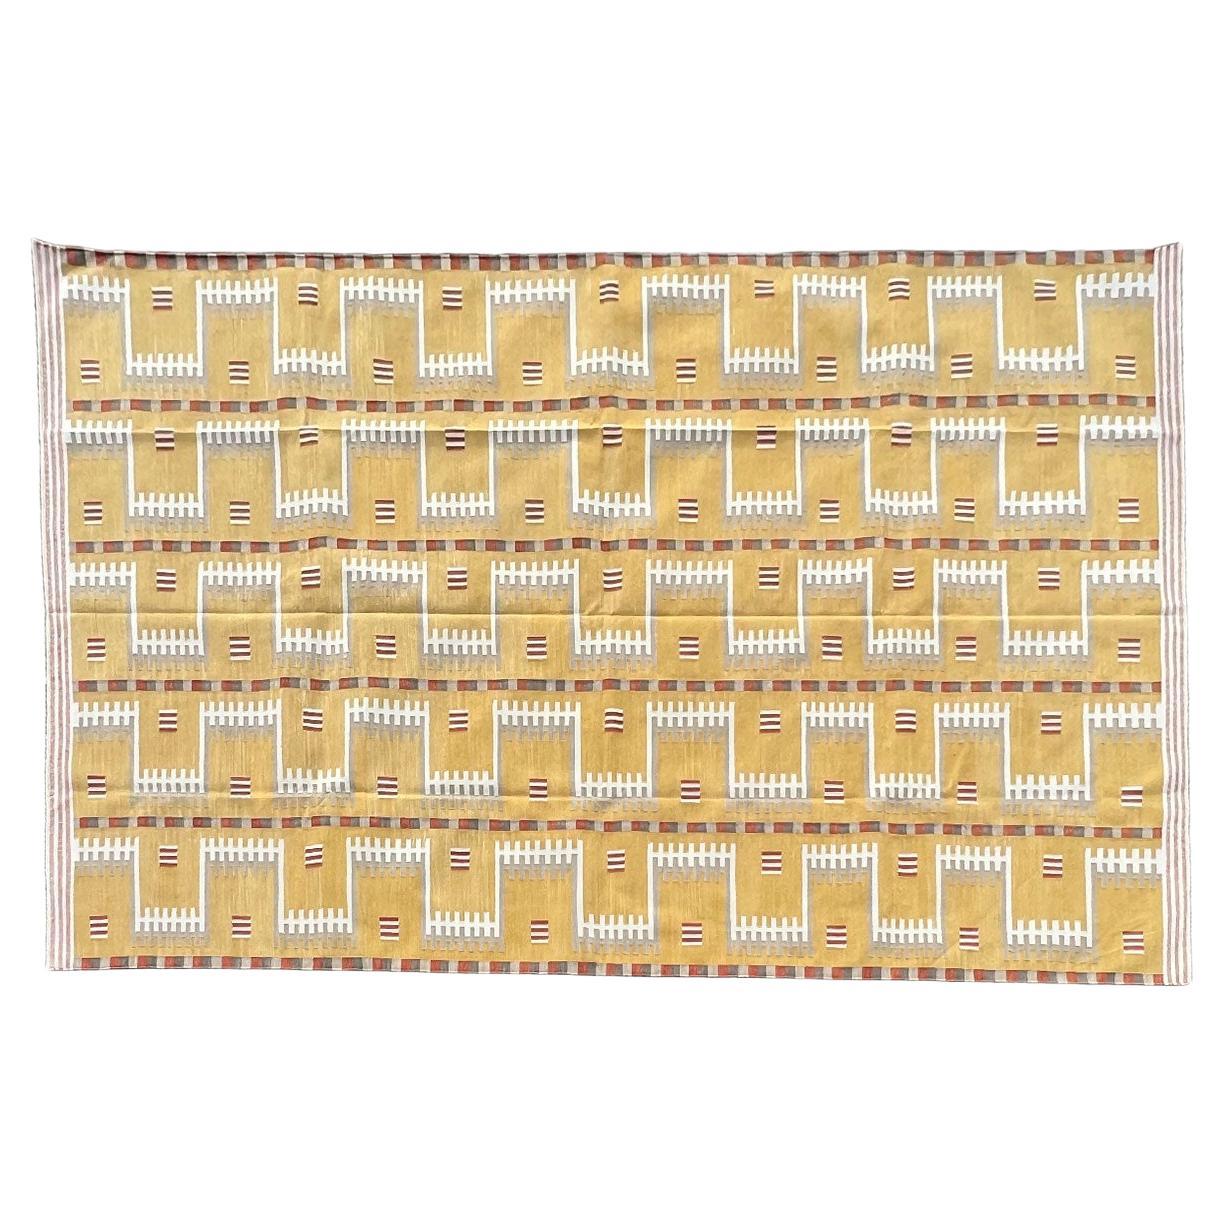 Cotton Natural Vegetable Dyed, Mustard, Cream & Beige Geometric Indian Dhurrie-5'x8'
These special flat-weave dhurries are hand-woven with 15 ply 100% cotton yarn. Due to the special manufacturing techniques used to create our rugs, the size and